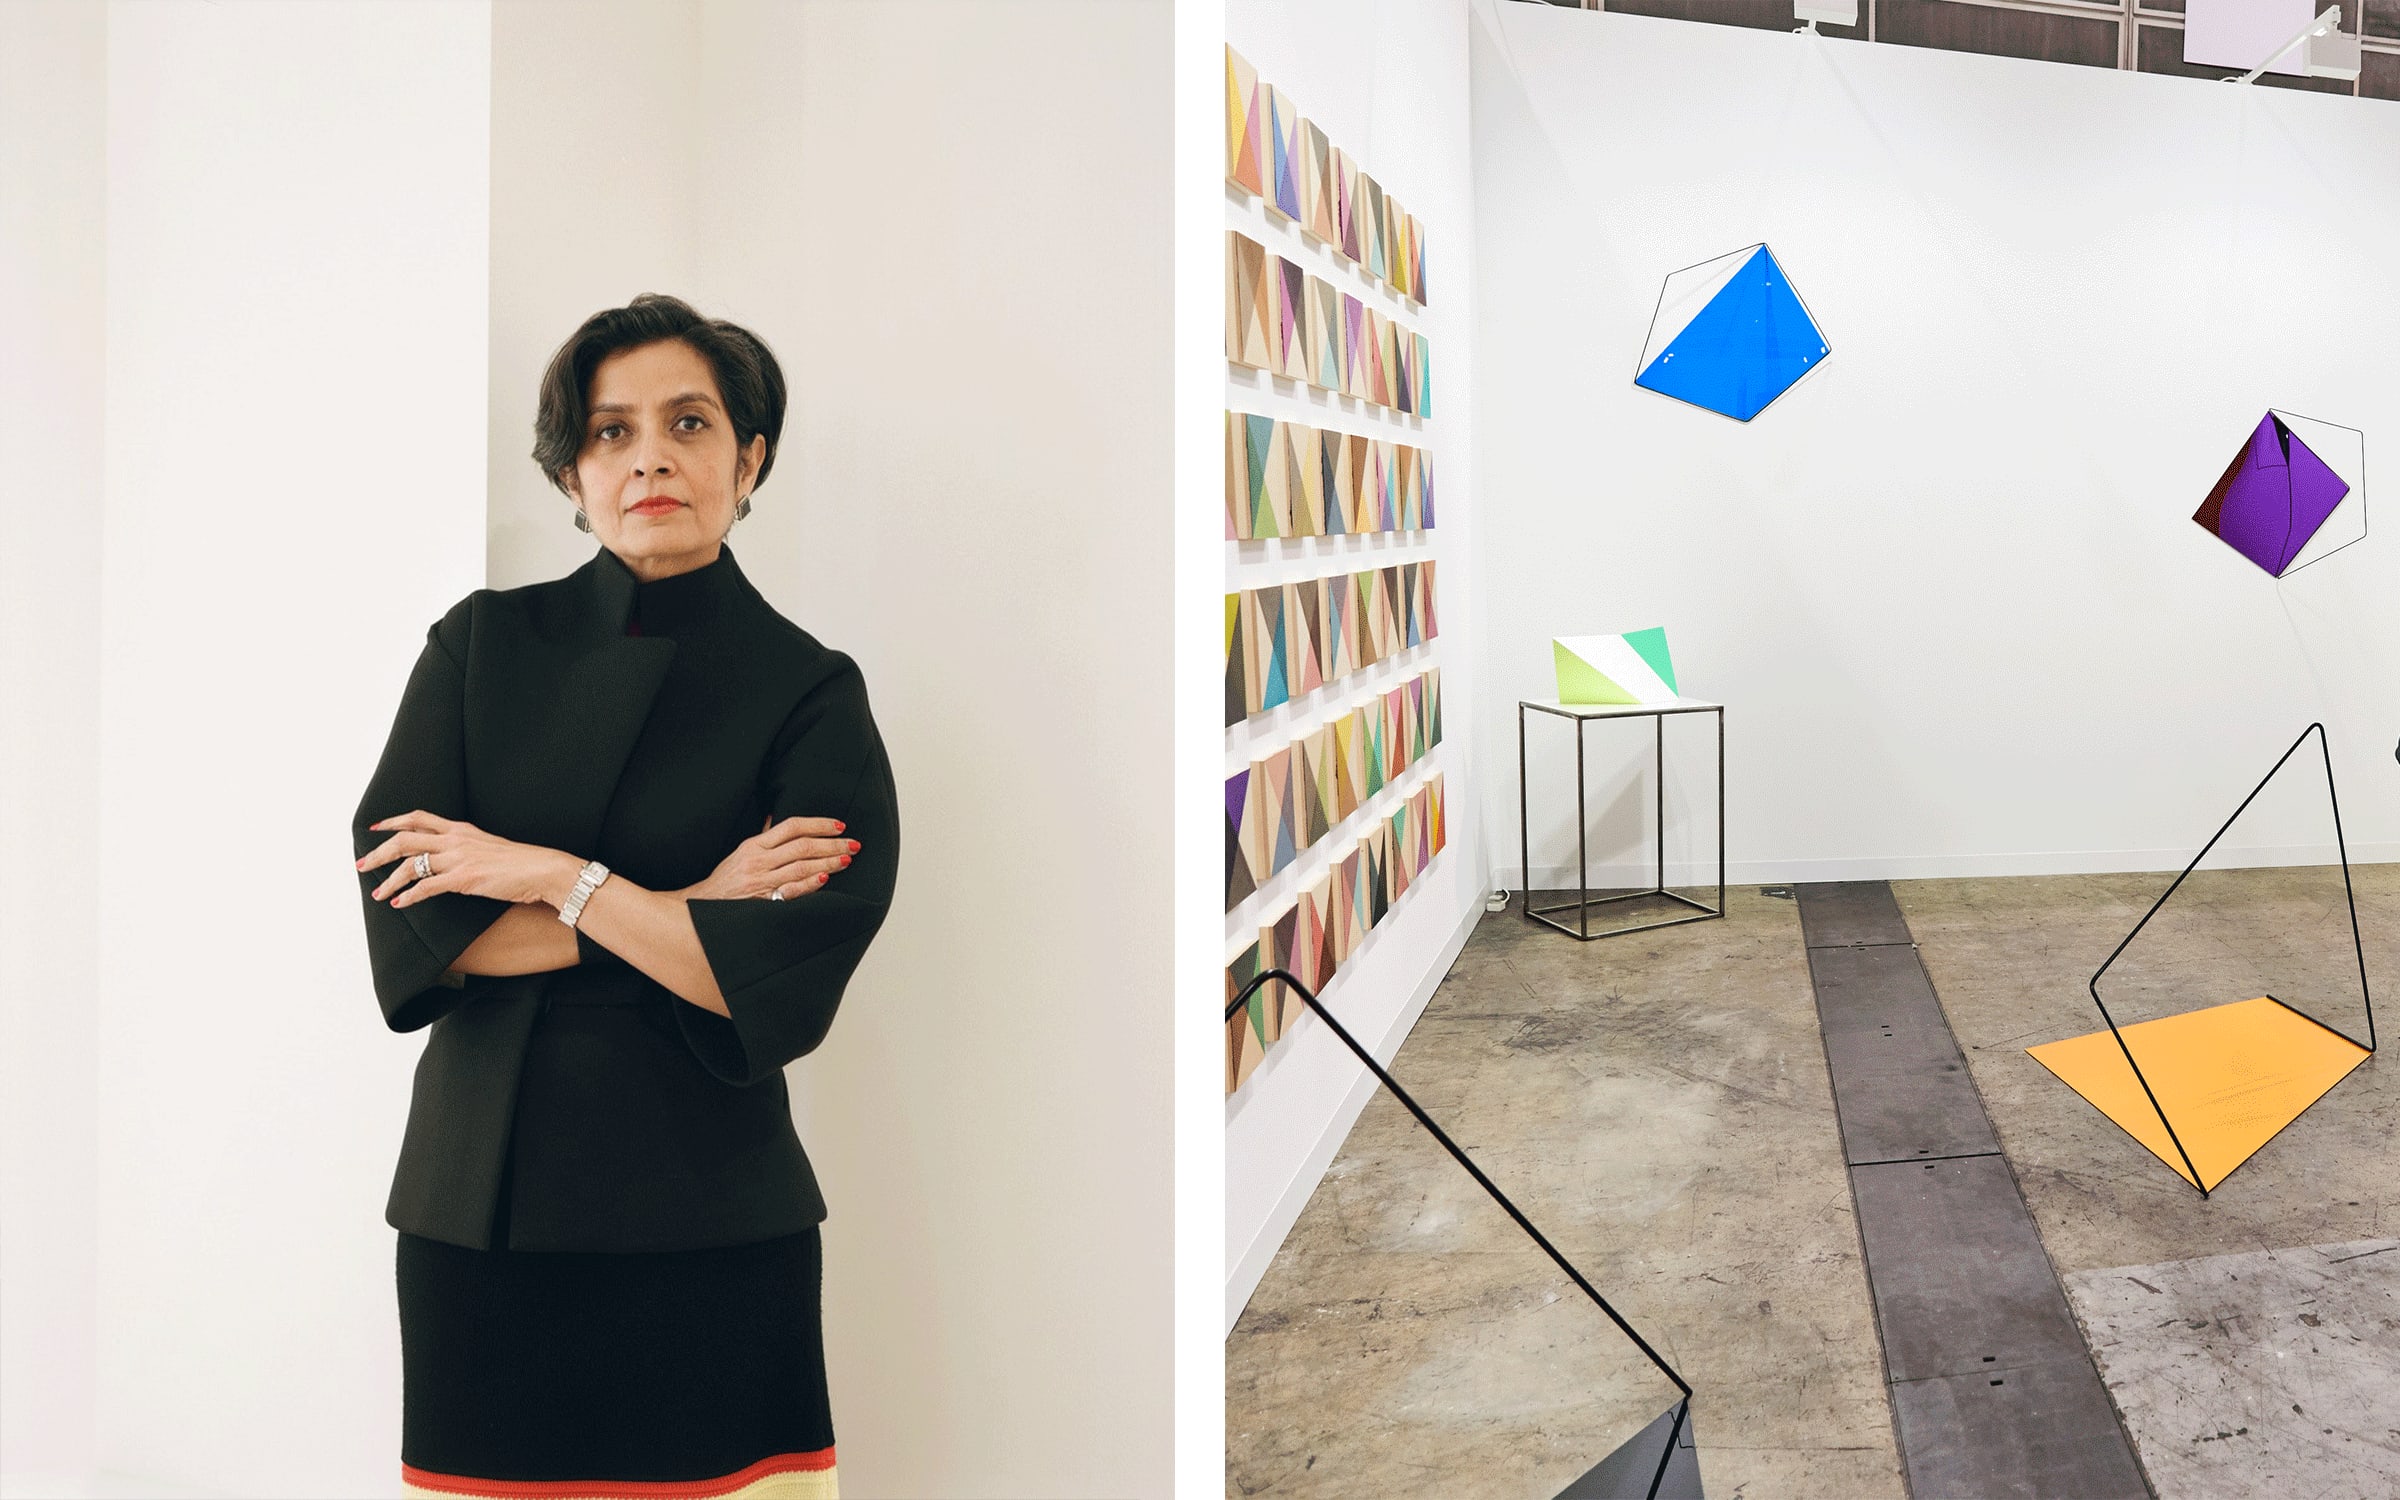 Left: Amrita Jhaveri. Photograph by Matthew Cole. Right: Installation view of artworks by Rana Begum presented by Jhaveri Contemporary in the Discoveries sector at Art Basel Hong Kong 2017.